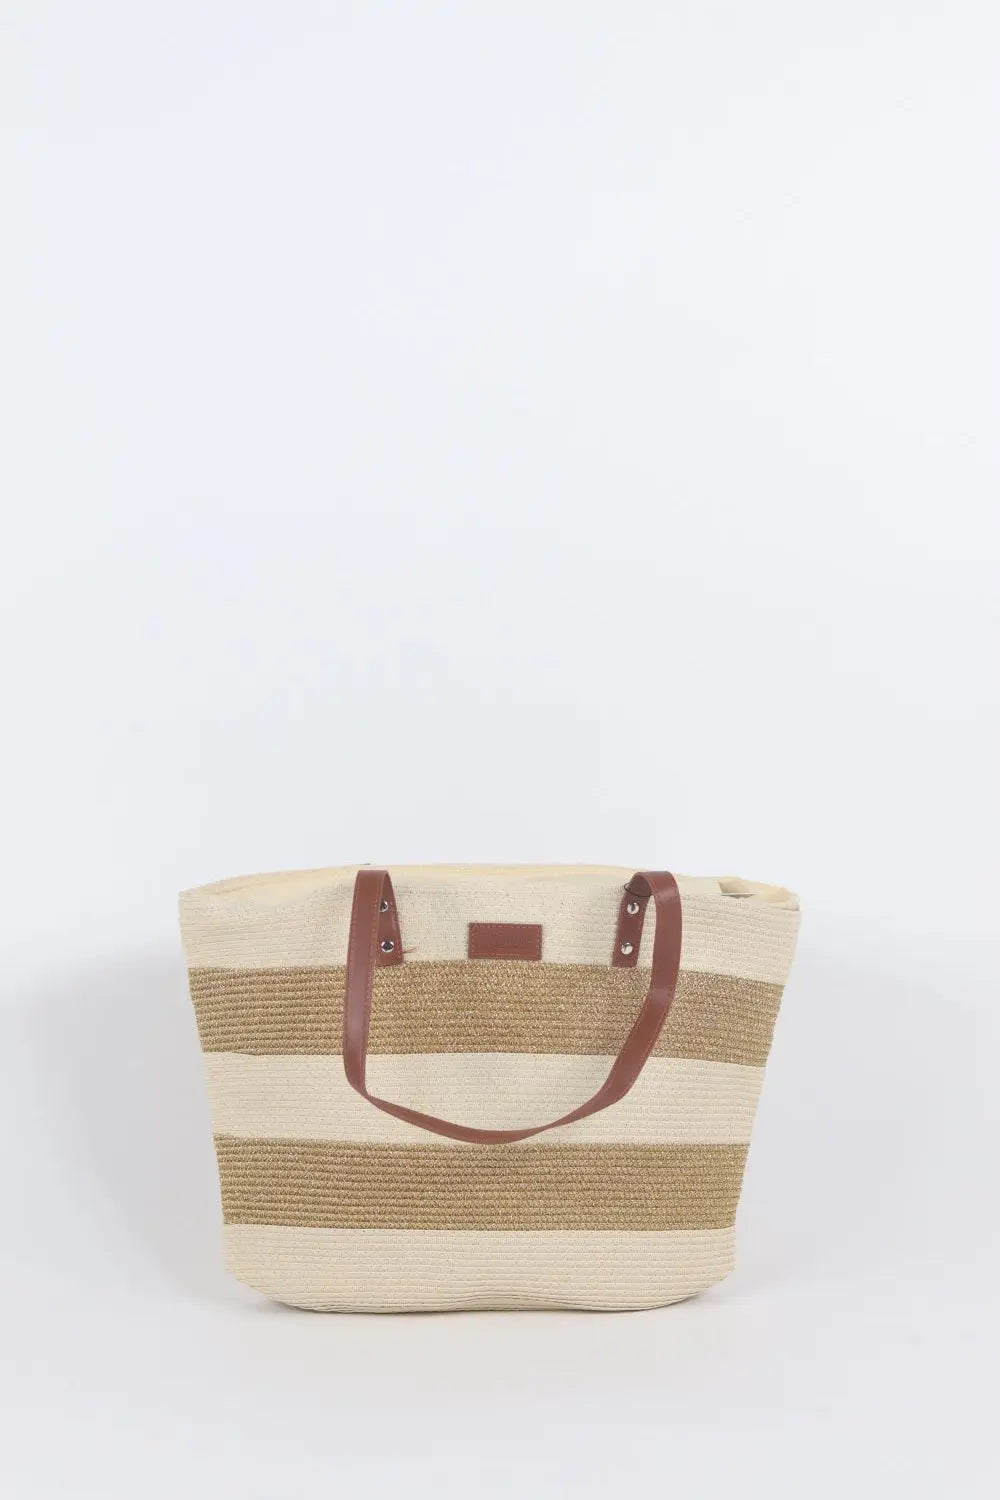 Straw Bag -  Voile